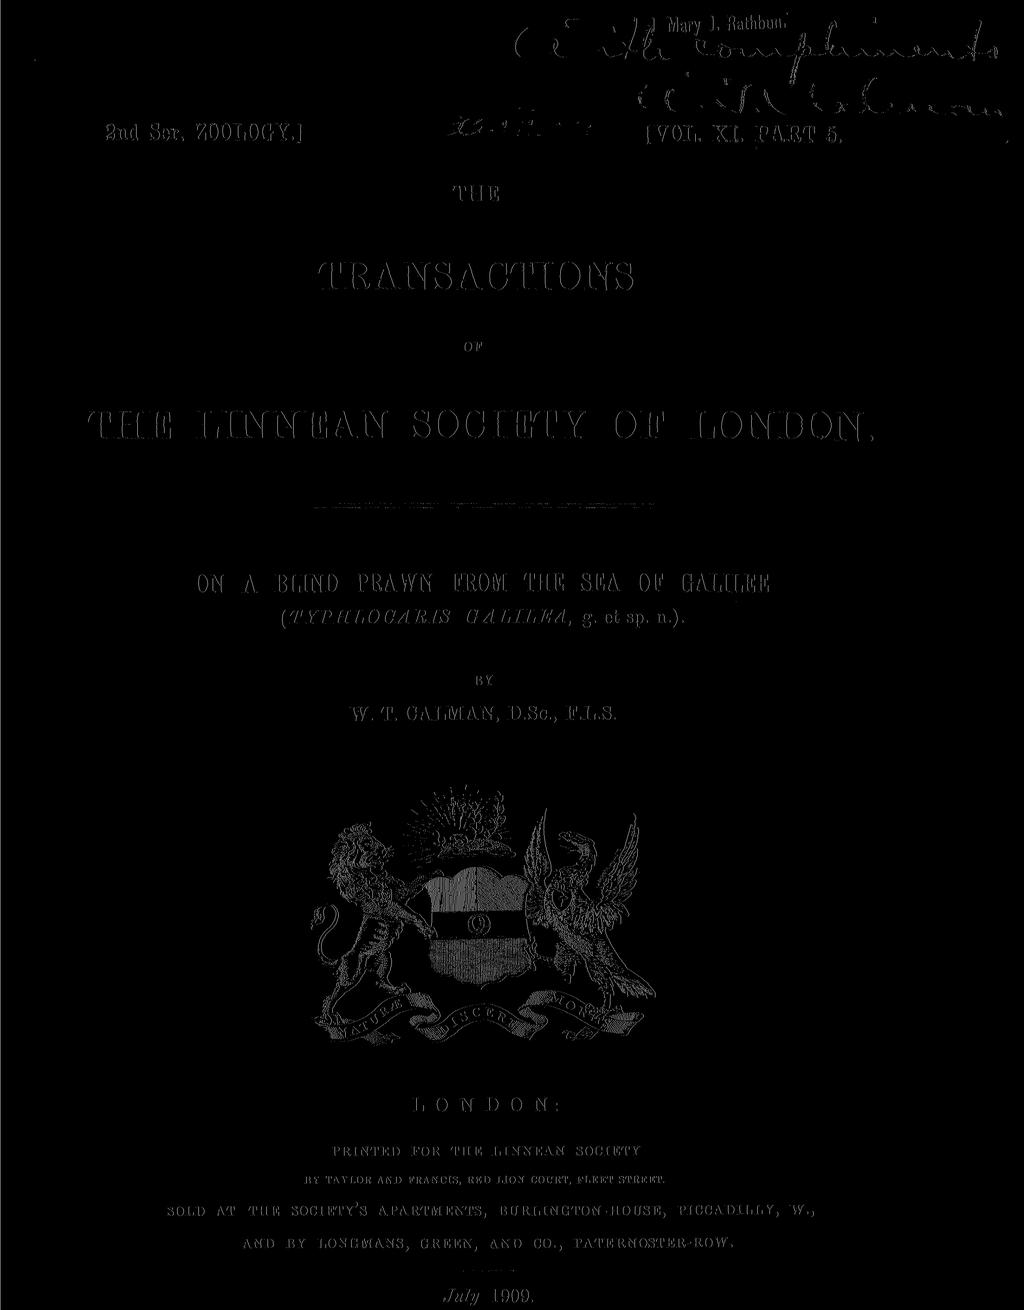 (t at; Mary J. Rathbun. i - v J. Y v > «* \ f n. 2nd Ser. ZOOLOGY.] ' ~ j VOL, XI. FART 5. THE TRANSACTION'S OF THE LINNEAN SOCIETY OF LONDON.